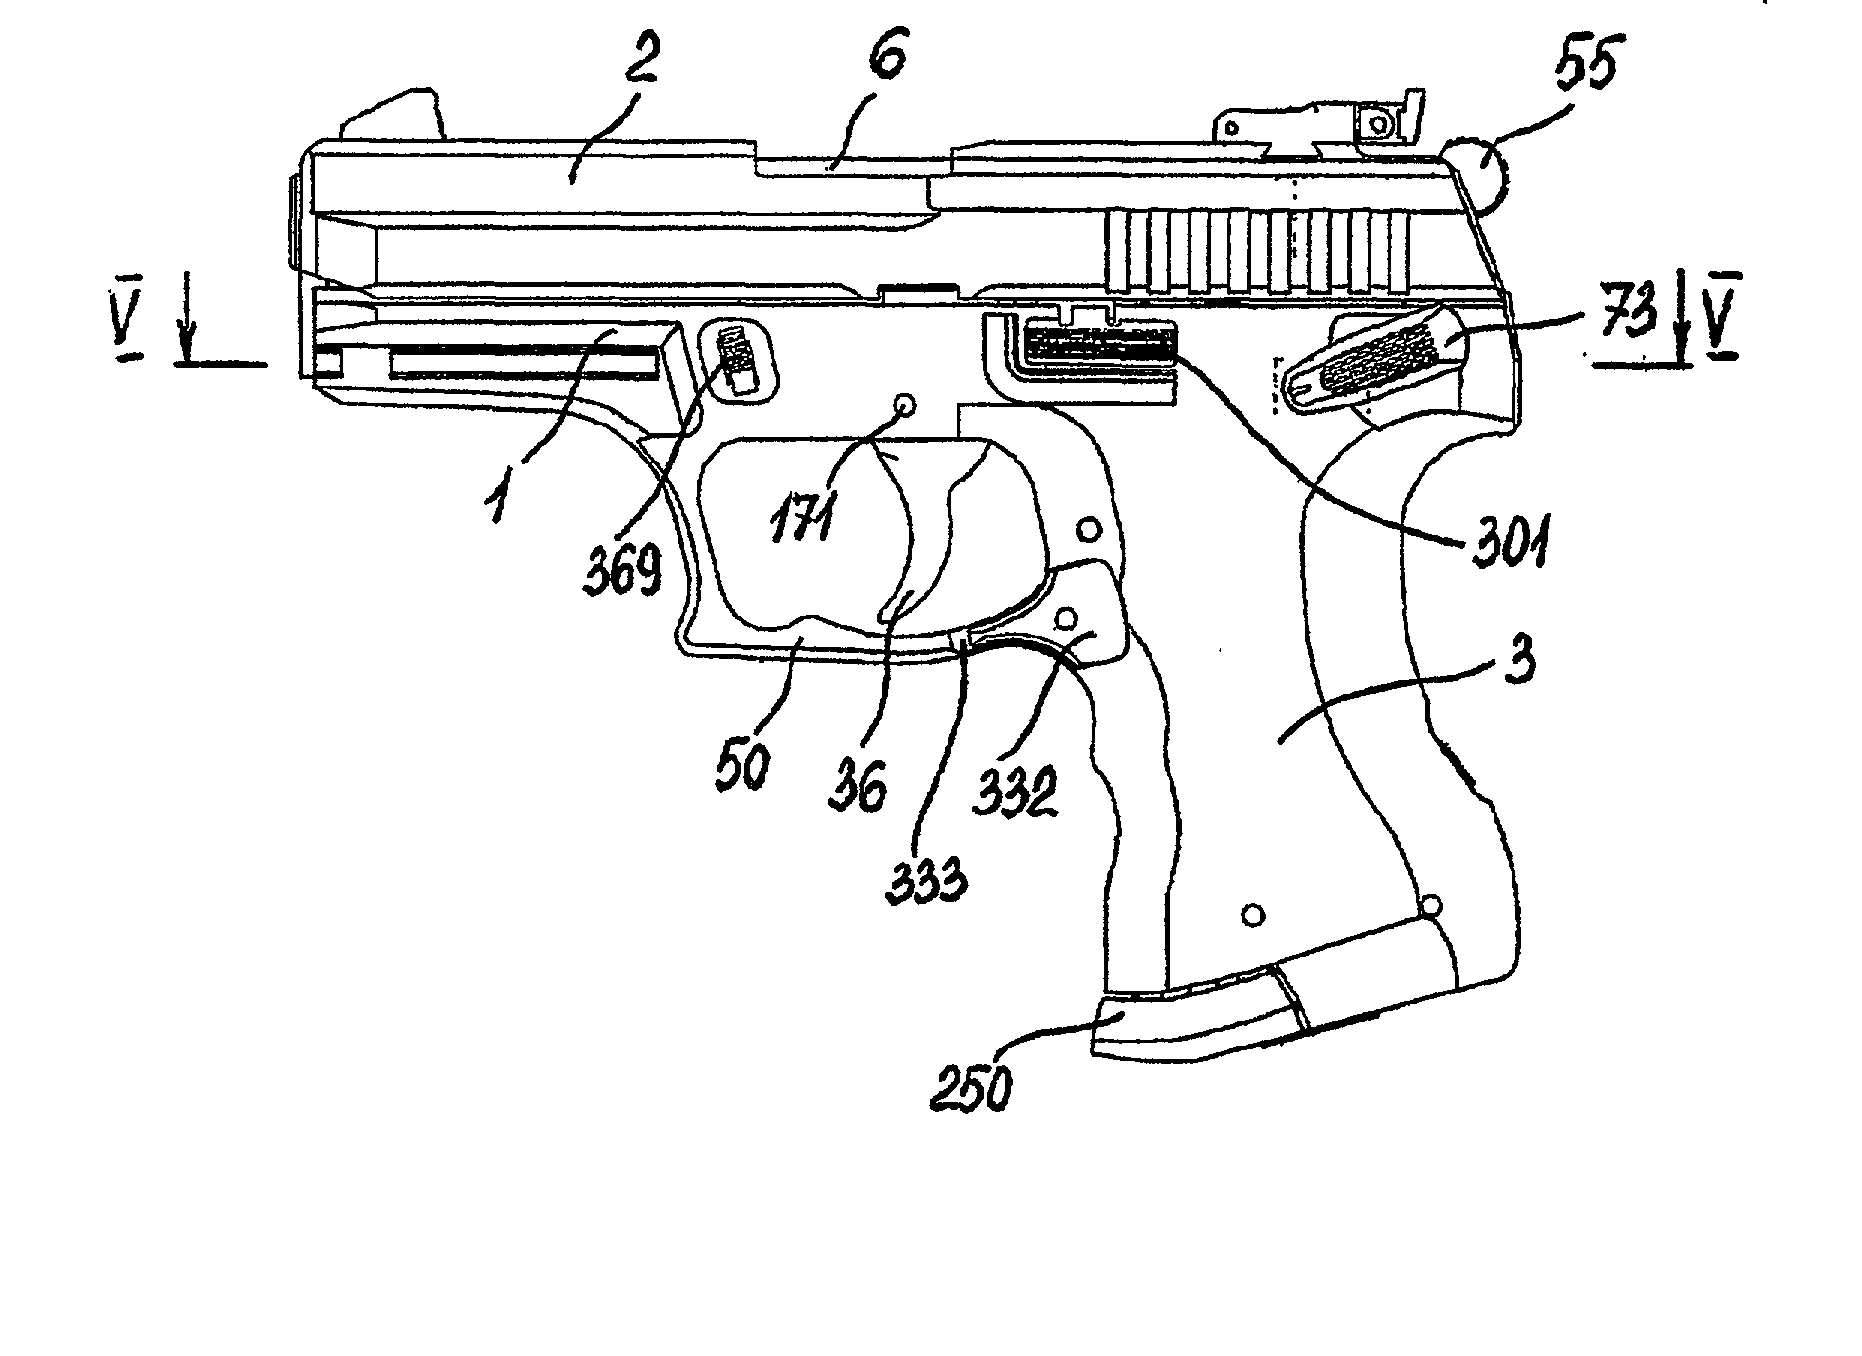 Repeating gas-cylinder pistol